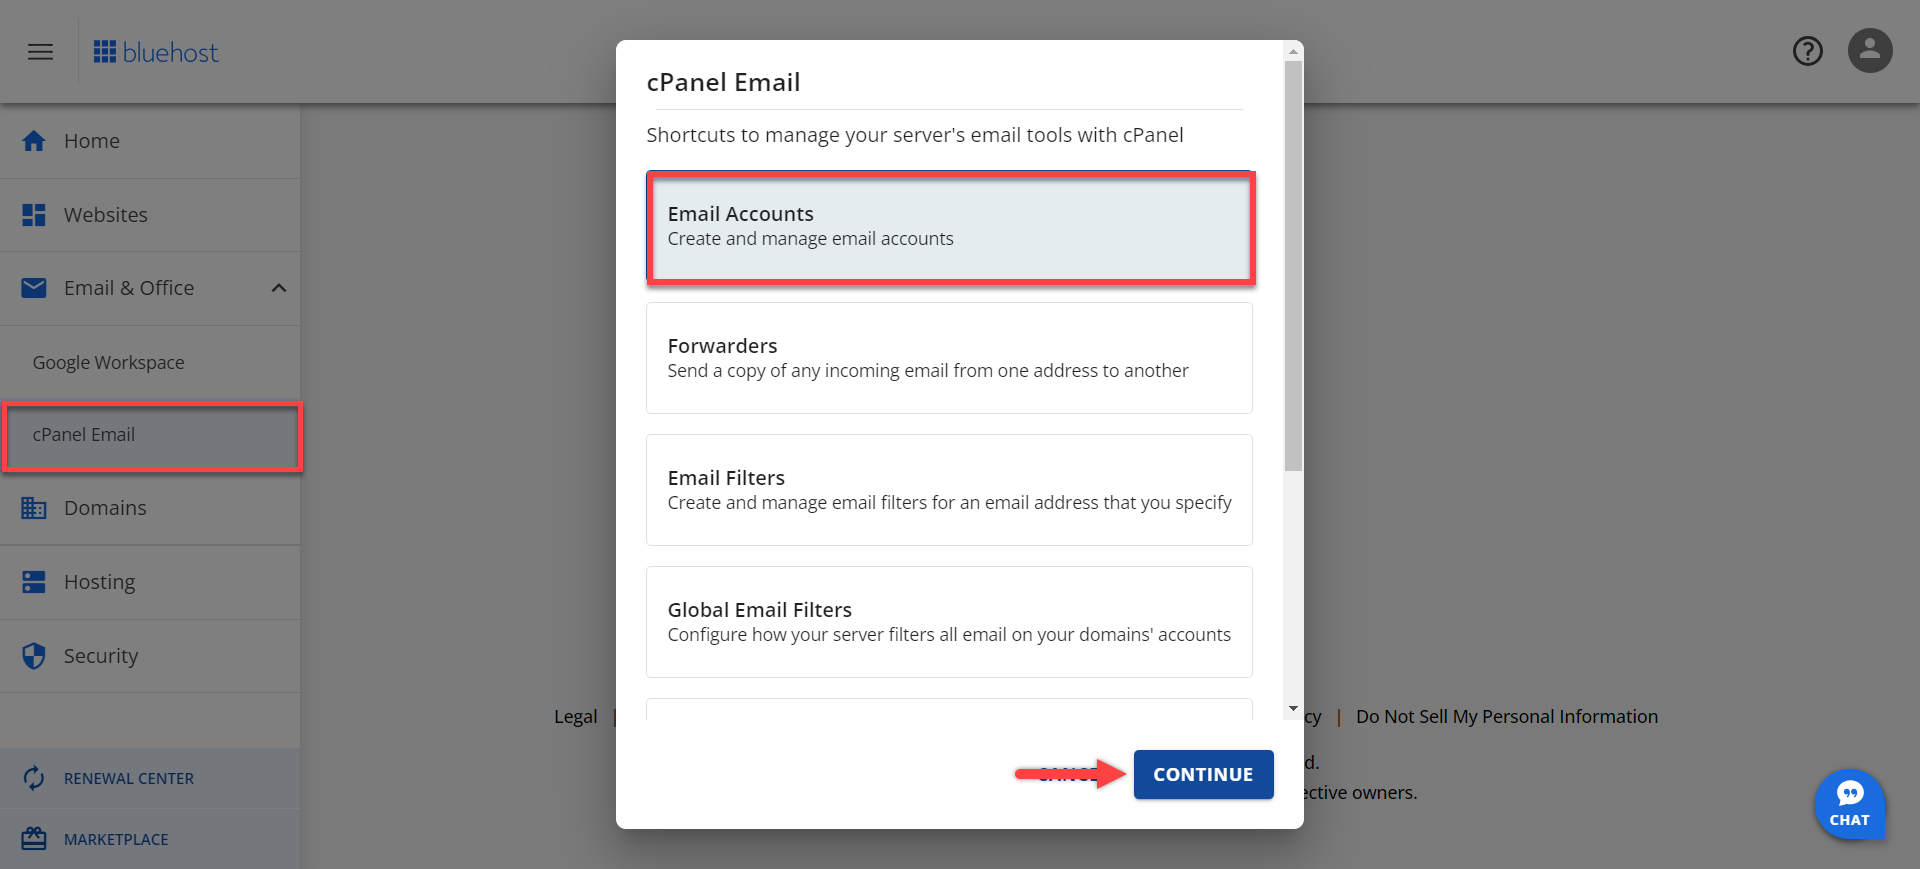 Bluehost interface showing 'Email Accounts' in cPanel Email menu with 'Continue' button.